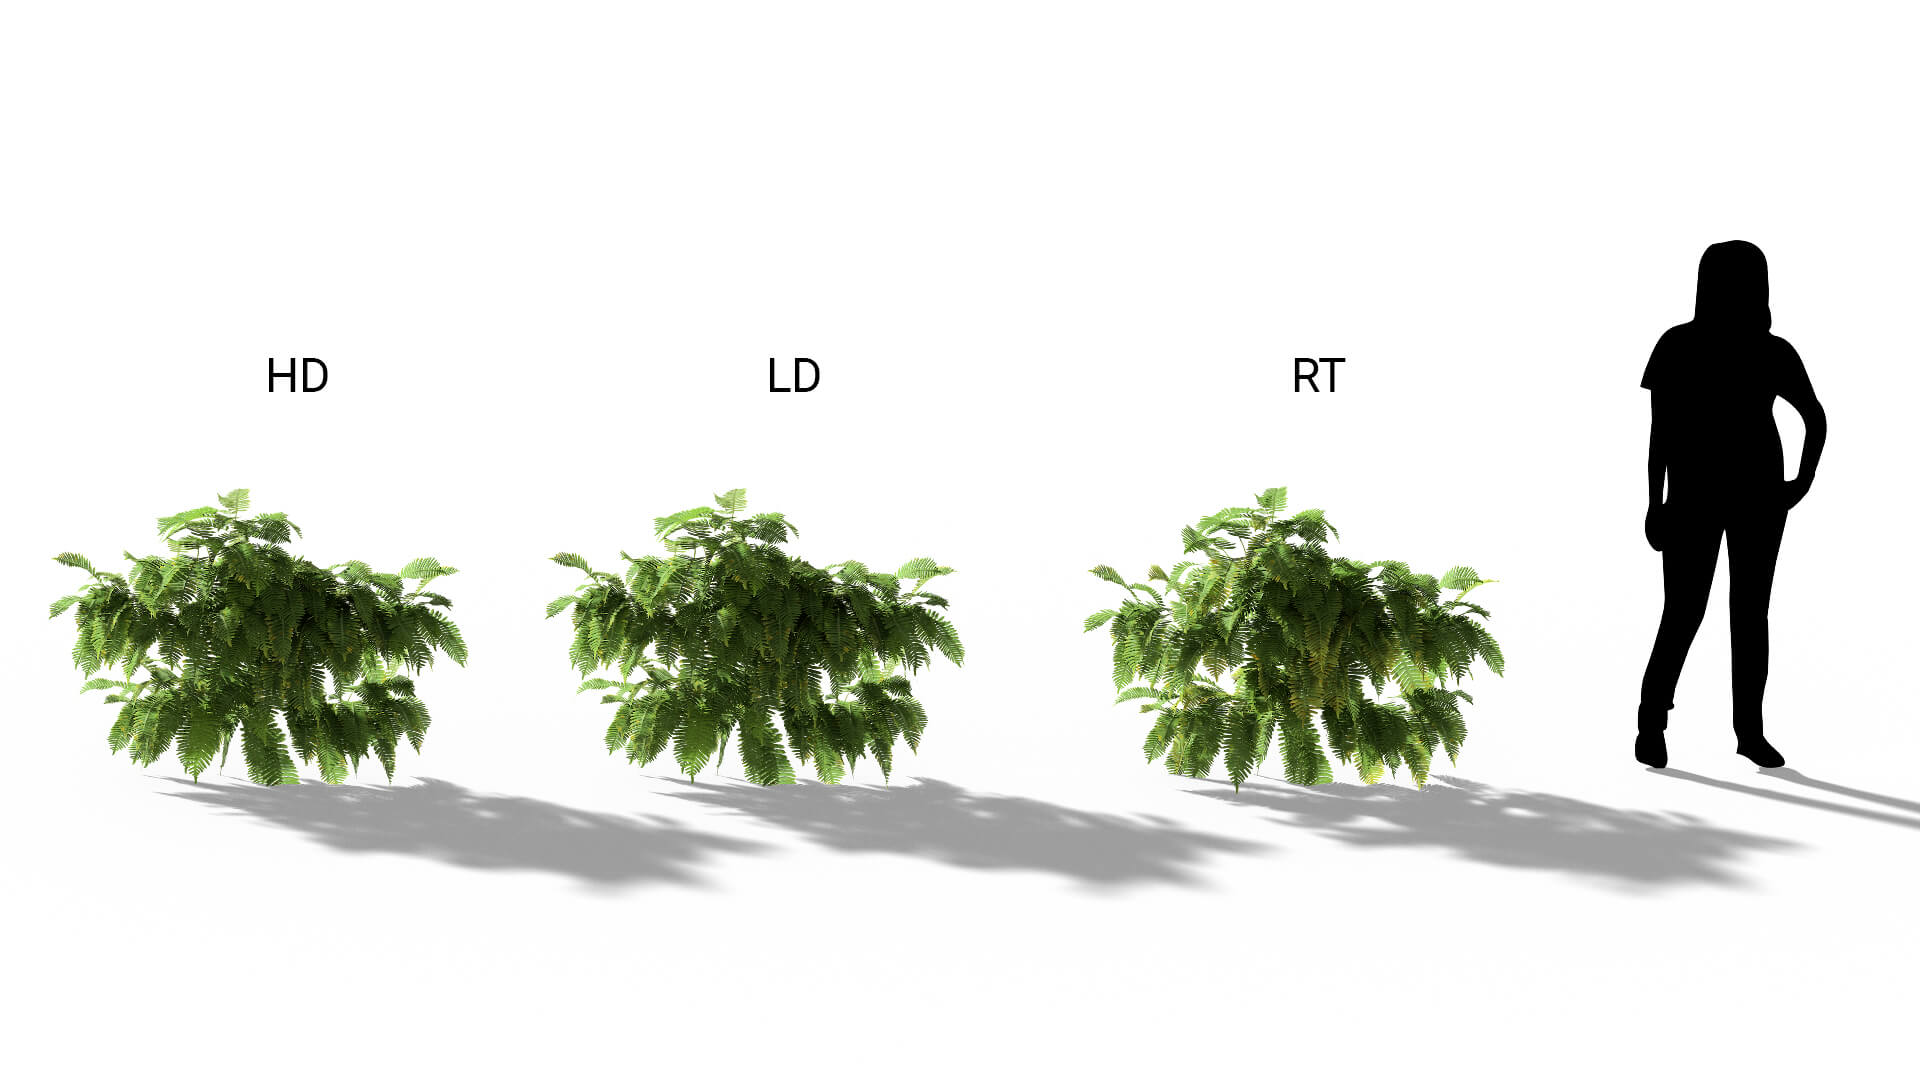 3D model of the Common polypody fern Polypodium vulgare included versions